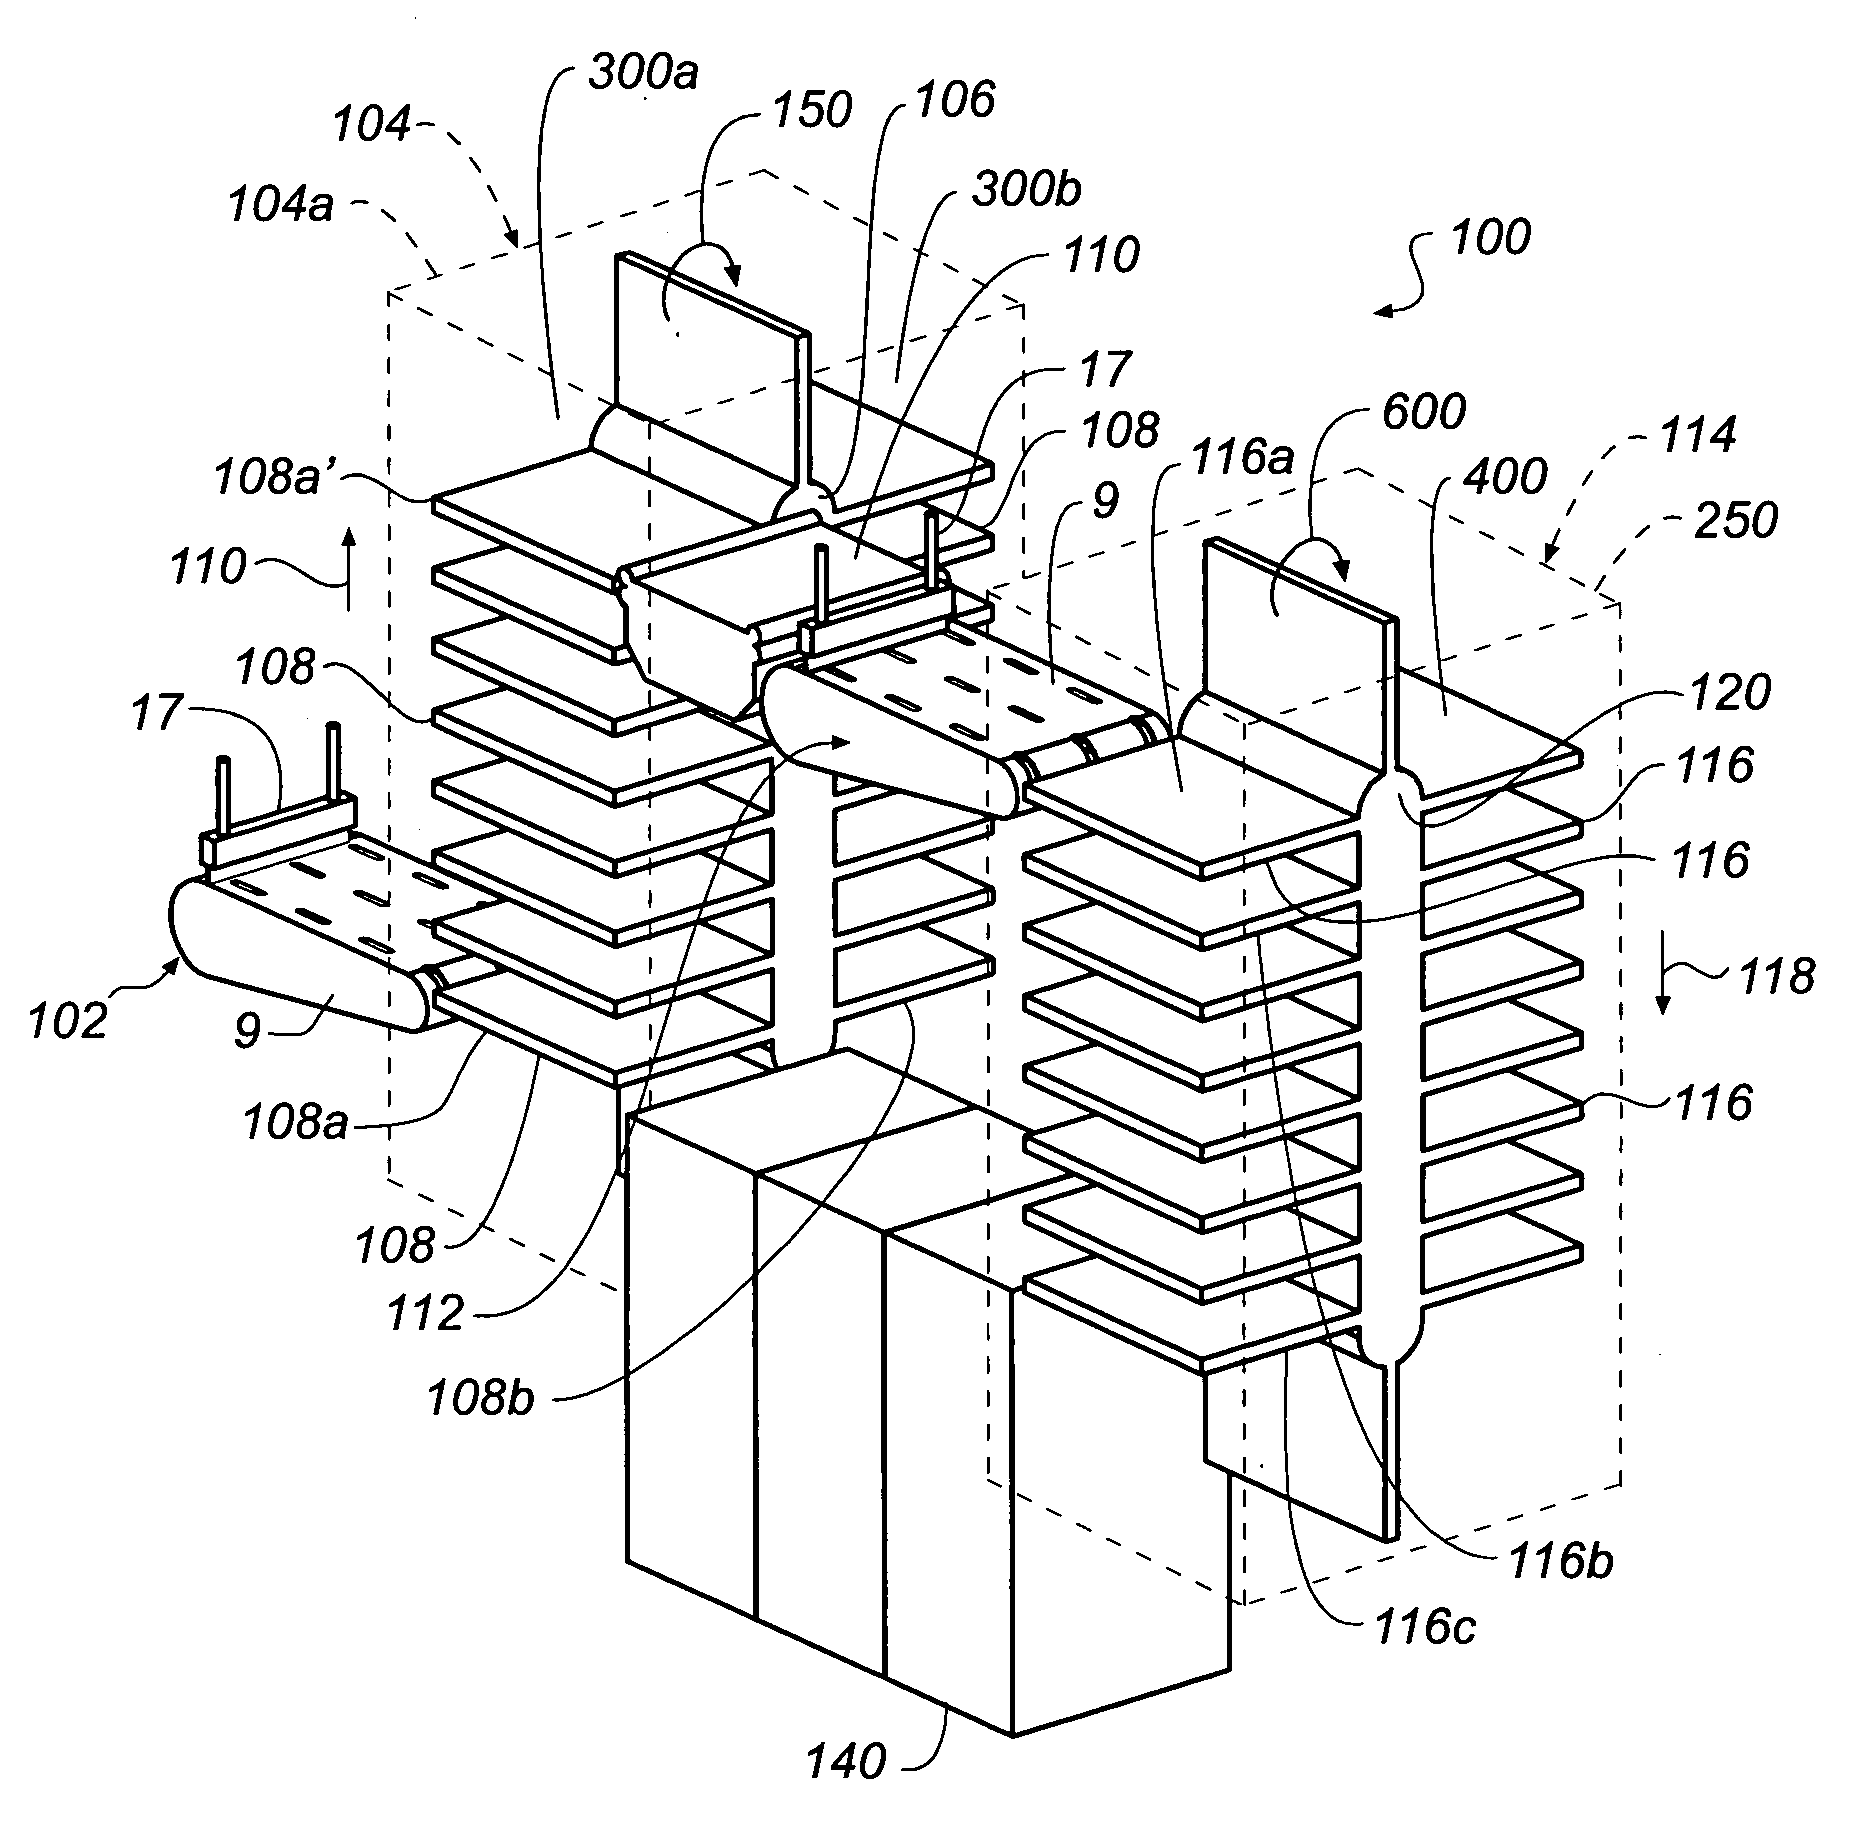 Photographic processing system having a vertical stacker arrangement